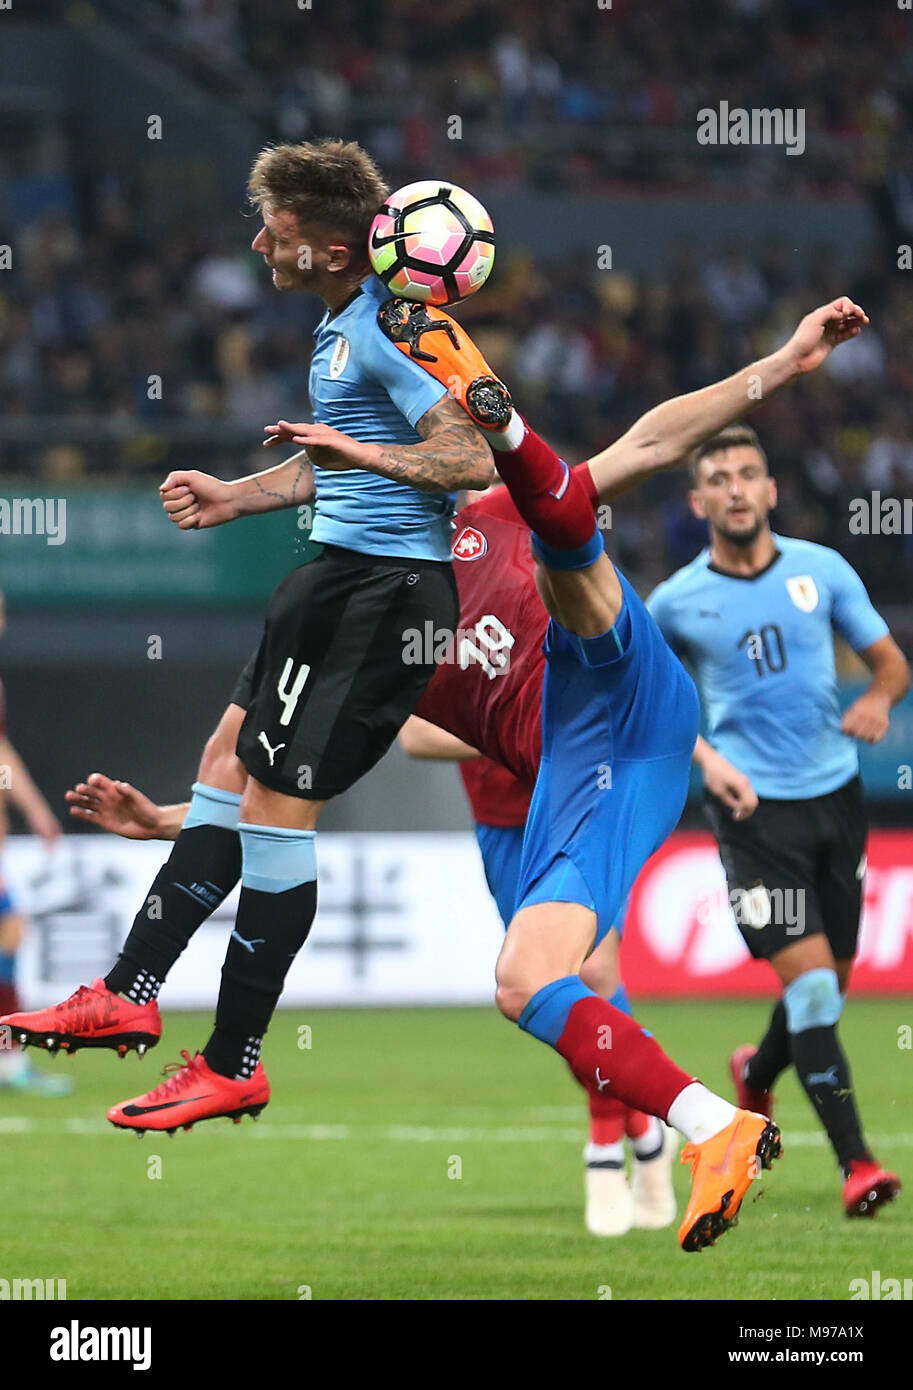 Nanning, China's Guangxi Zhuang Autonomous Region. 23rd Mar, 2018. Patrik Schick (R) of the Czech Republic vies with Guillermo Varela of Uruguay during the match between Uruguay and the Czech Republic at the 2018 China Cup International Football Championship in Nanning, capital of south China's Guangxi Zhuang Autonomous Region, March 23, 2018. Credit: Cao Can/Xinhua/Alamy Live News Stock Photo